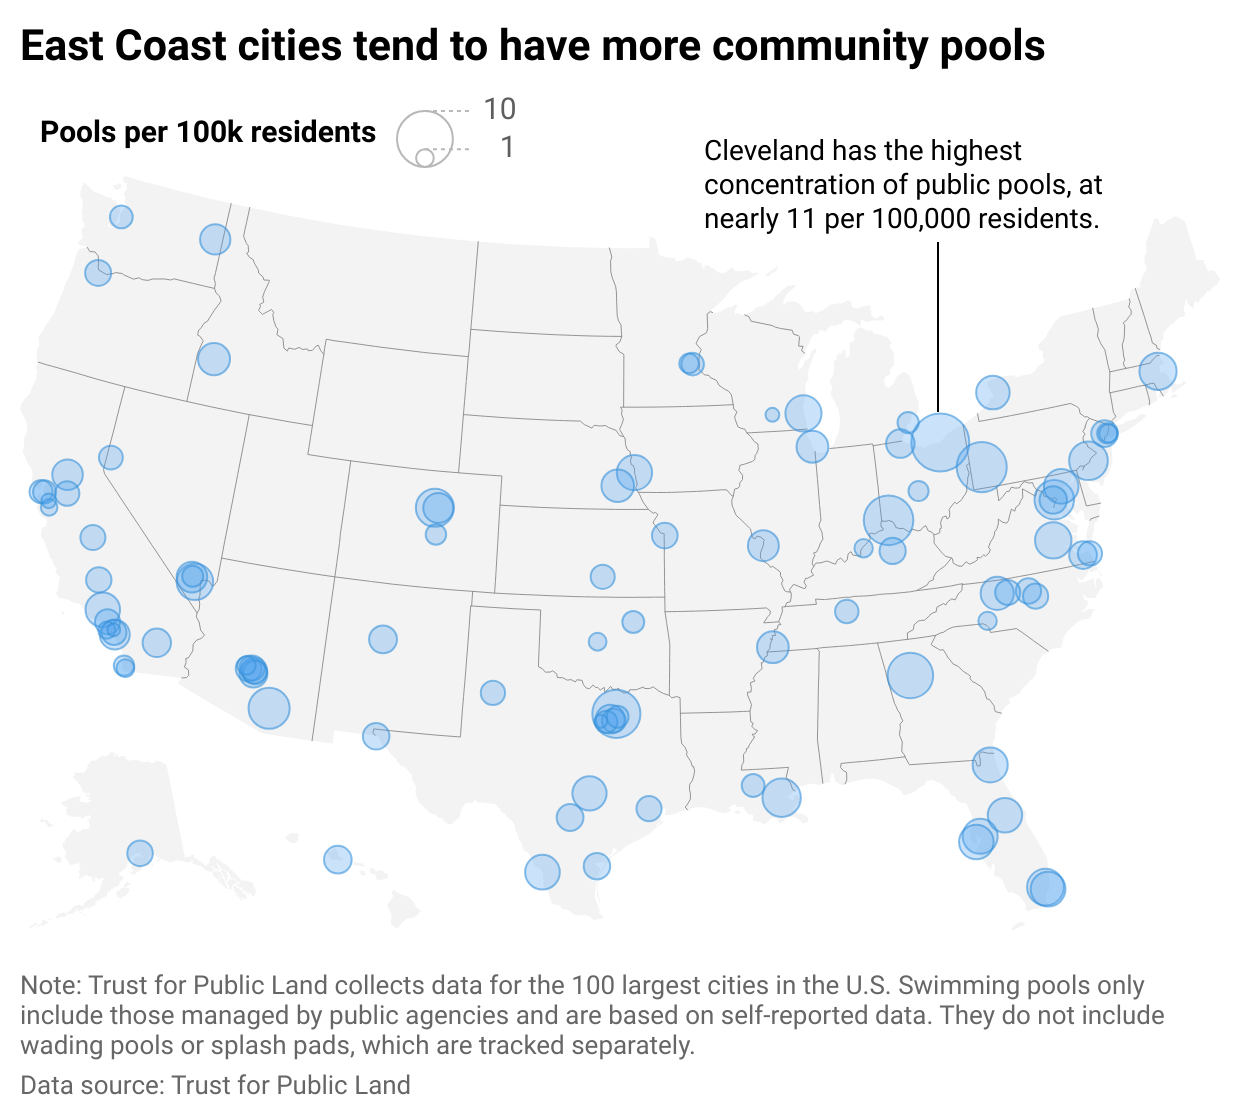 A map of the U.S. showing larger blue circles for cities with higher concentrations of public pools and smaller circles for cities with lower concentrations.